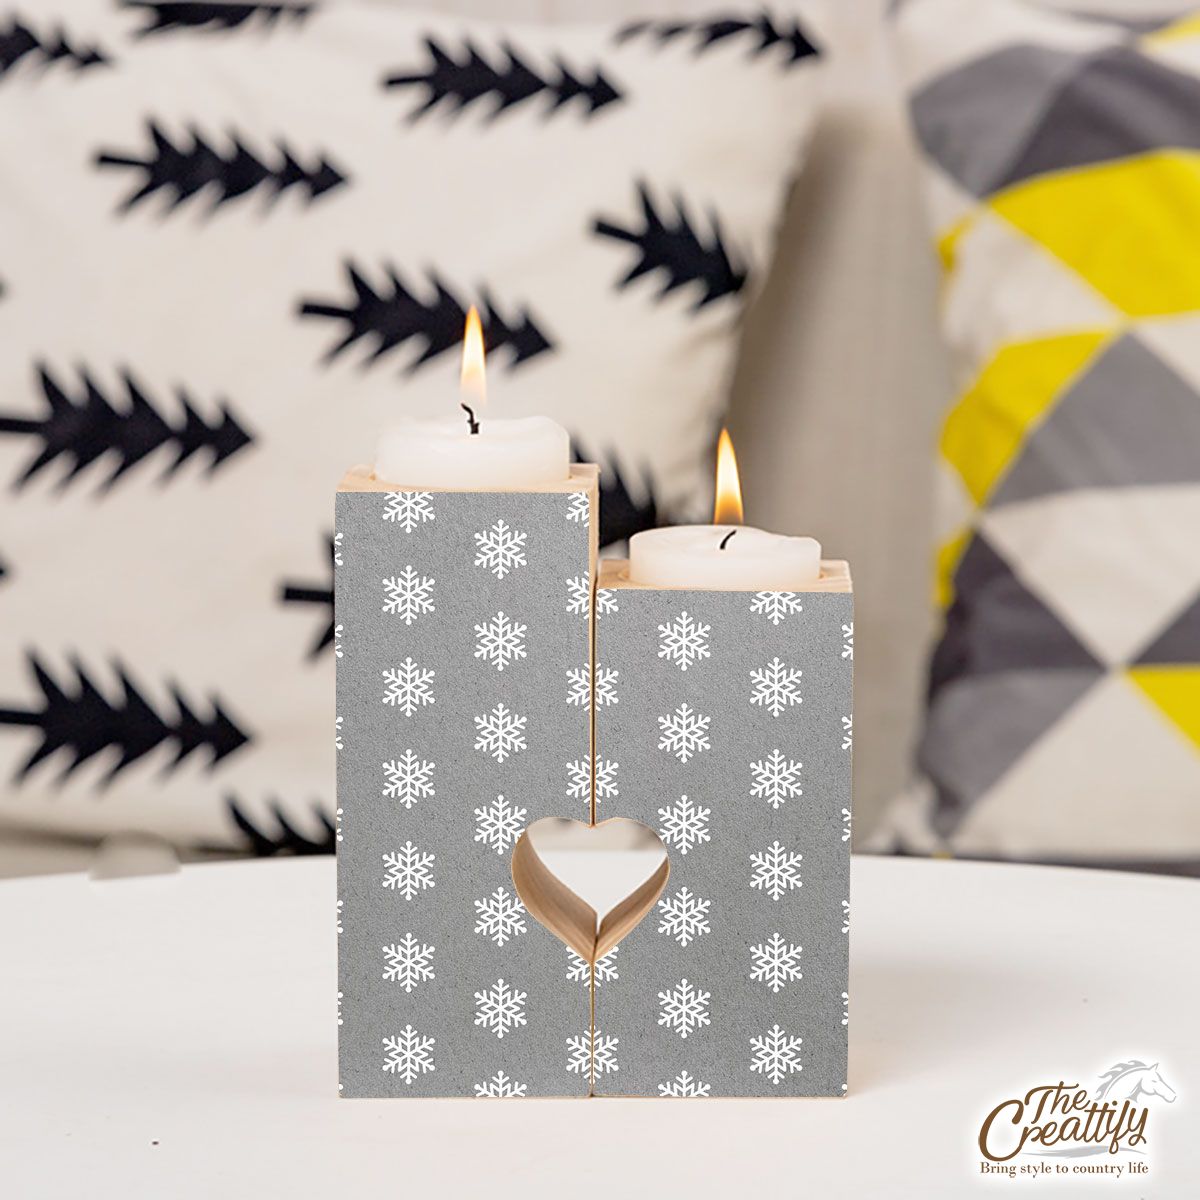 Snowflake Pattern, Christmas Snowflakes, Christmas Present Ideas On Grey Heart Wooden Candlestick | Wooden